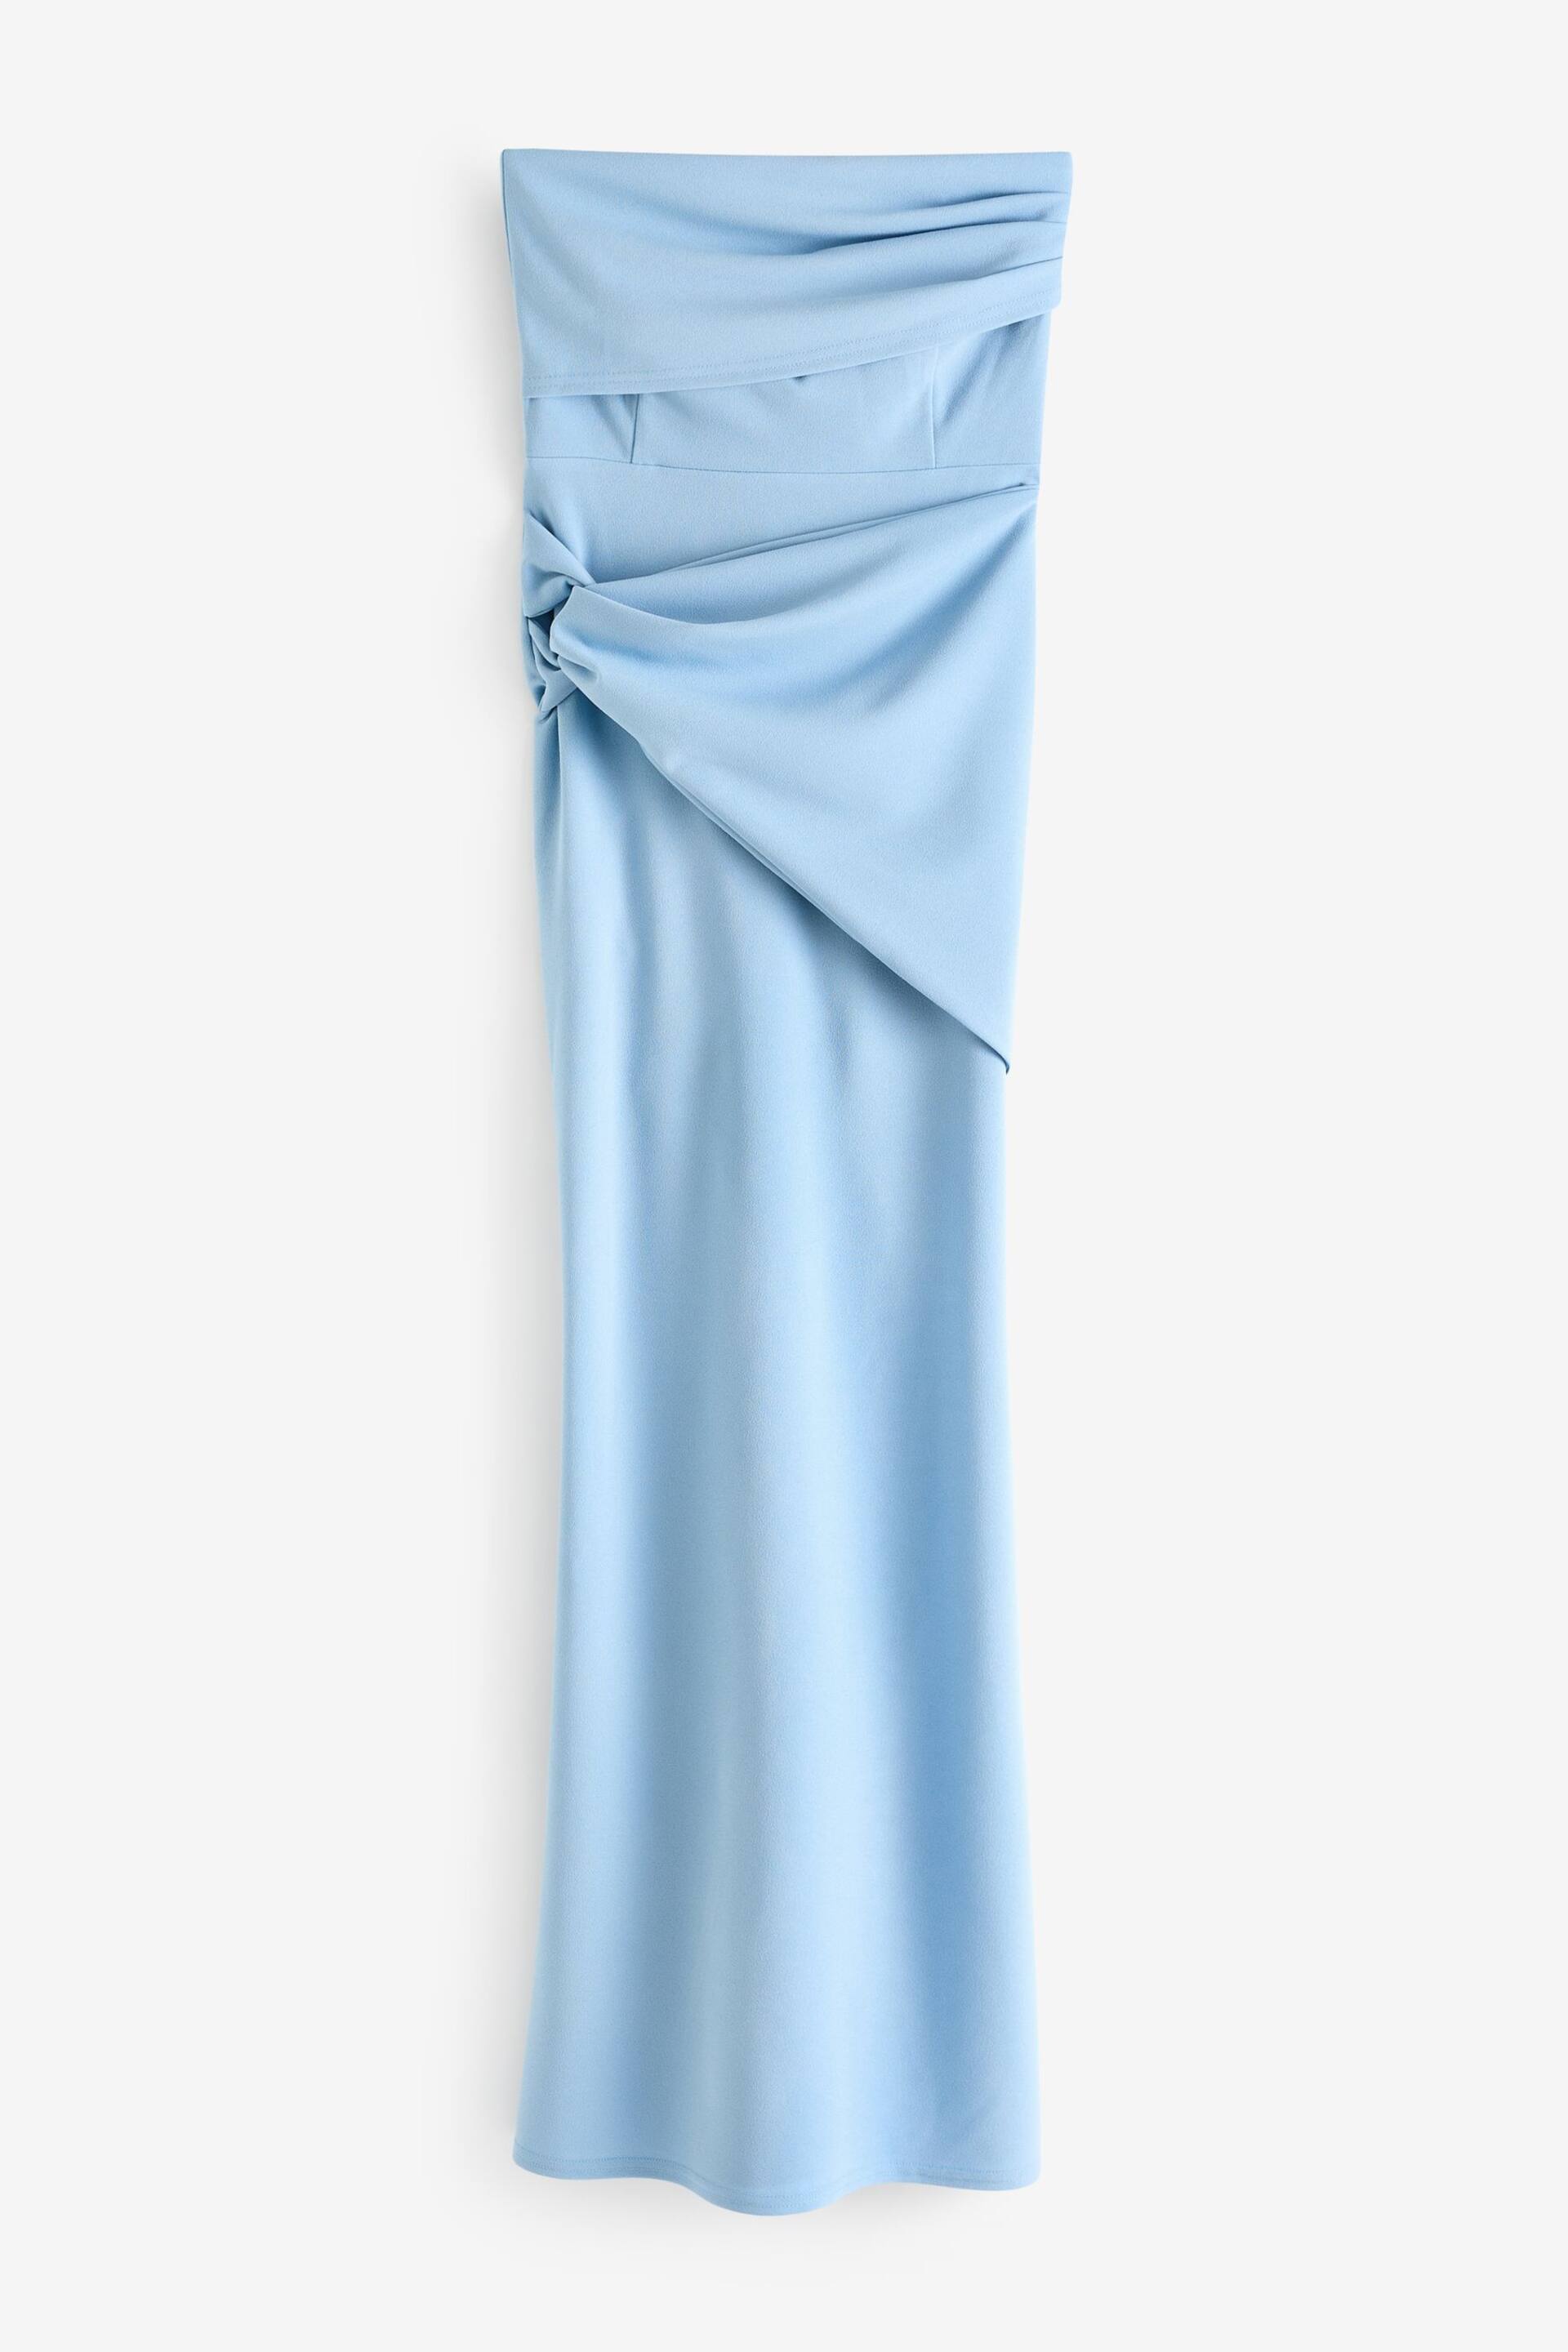 Sistaglam Blue Bandeau Strapless Maxi Dress with Overlay and Knot Detail - Image 5 of 5